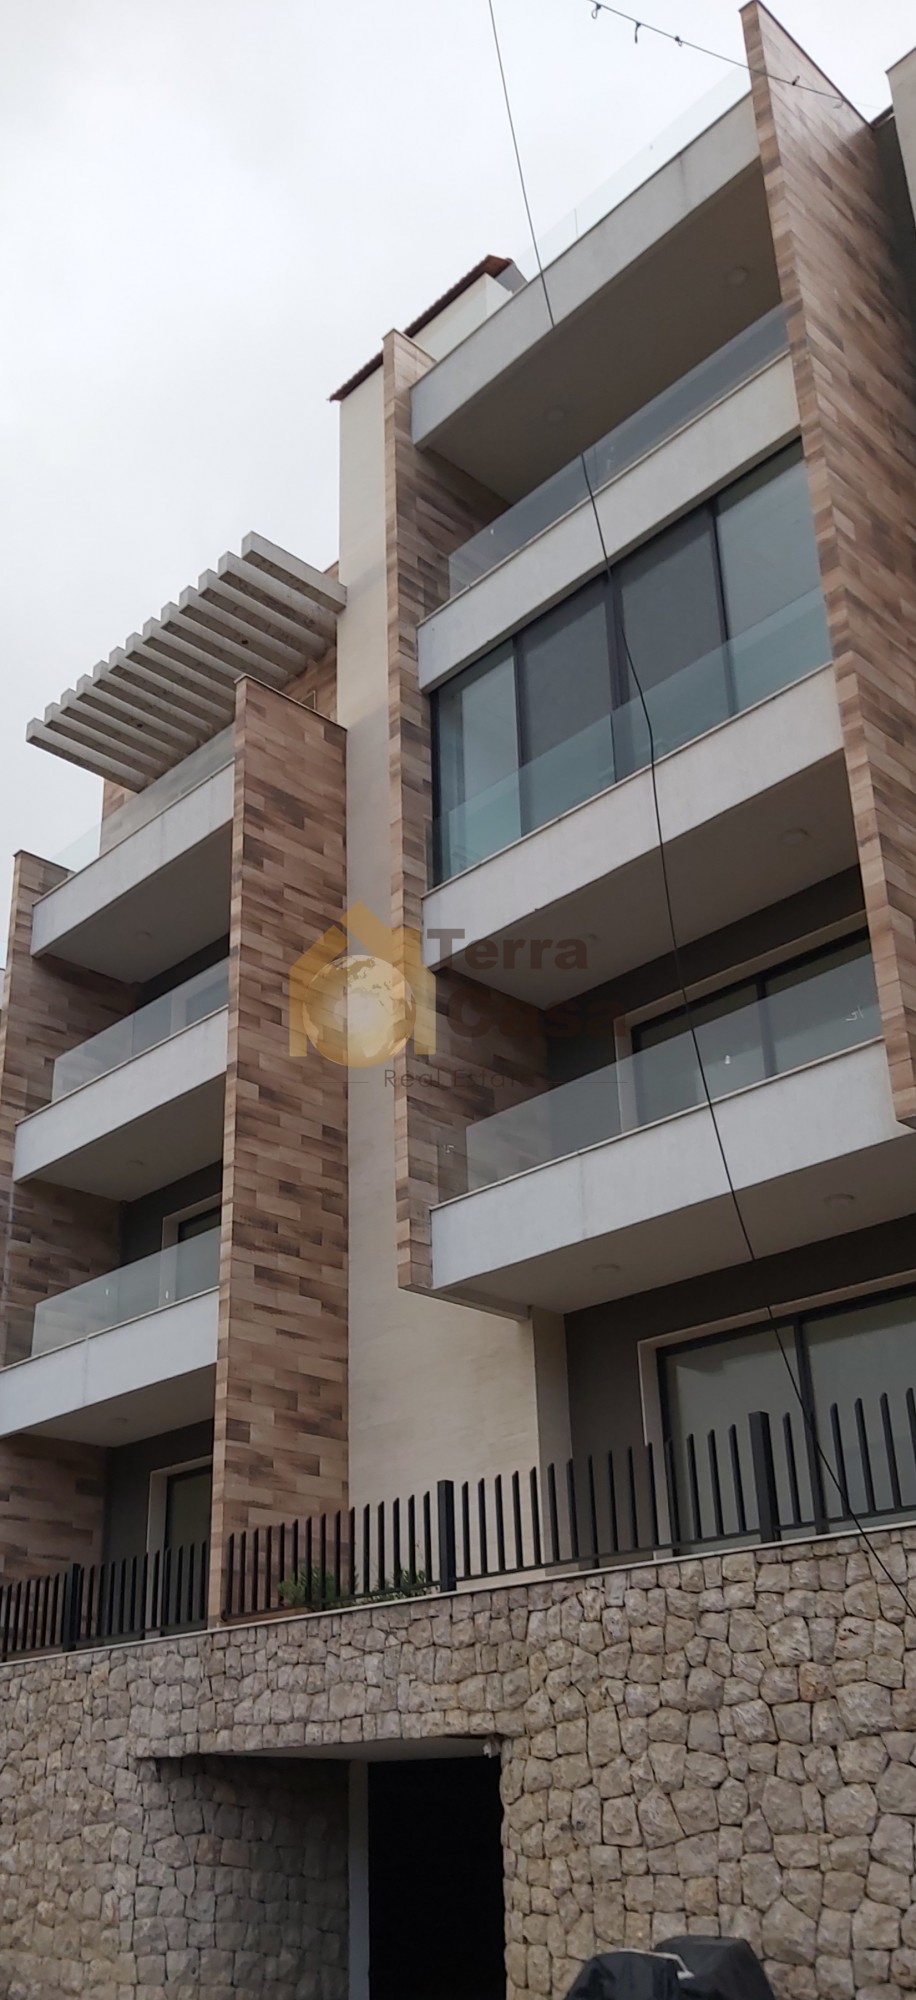 Brand new Duplex with 23 sqm terrace cash payment.